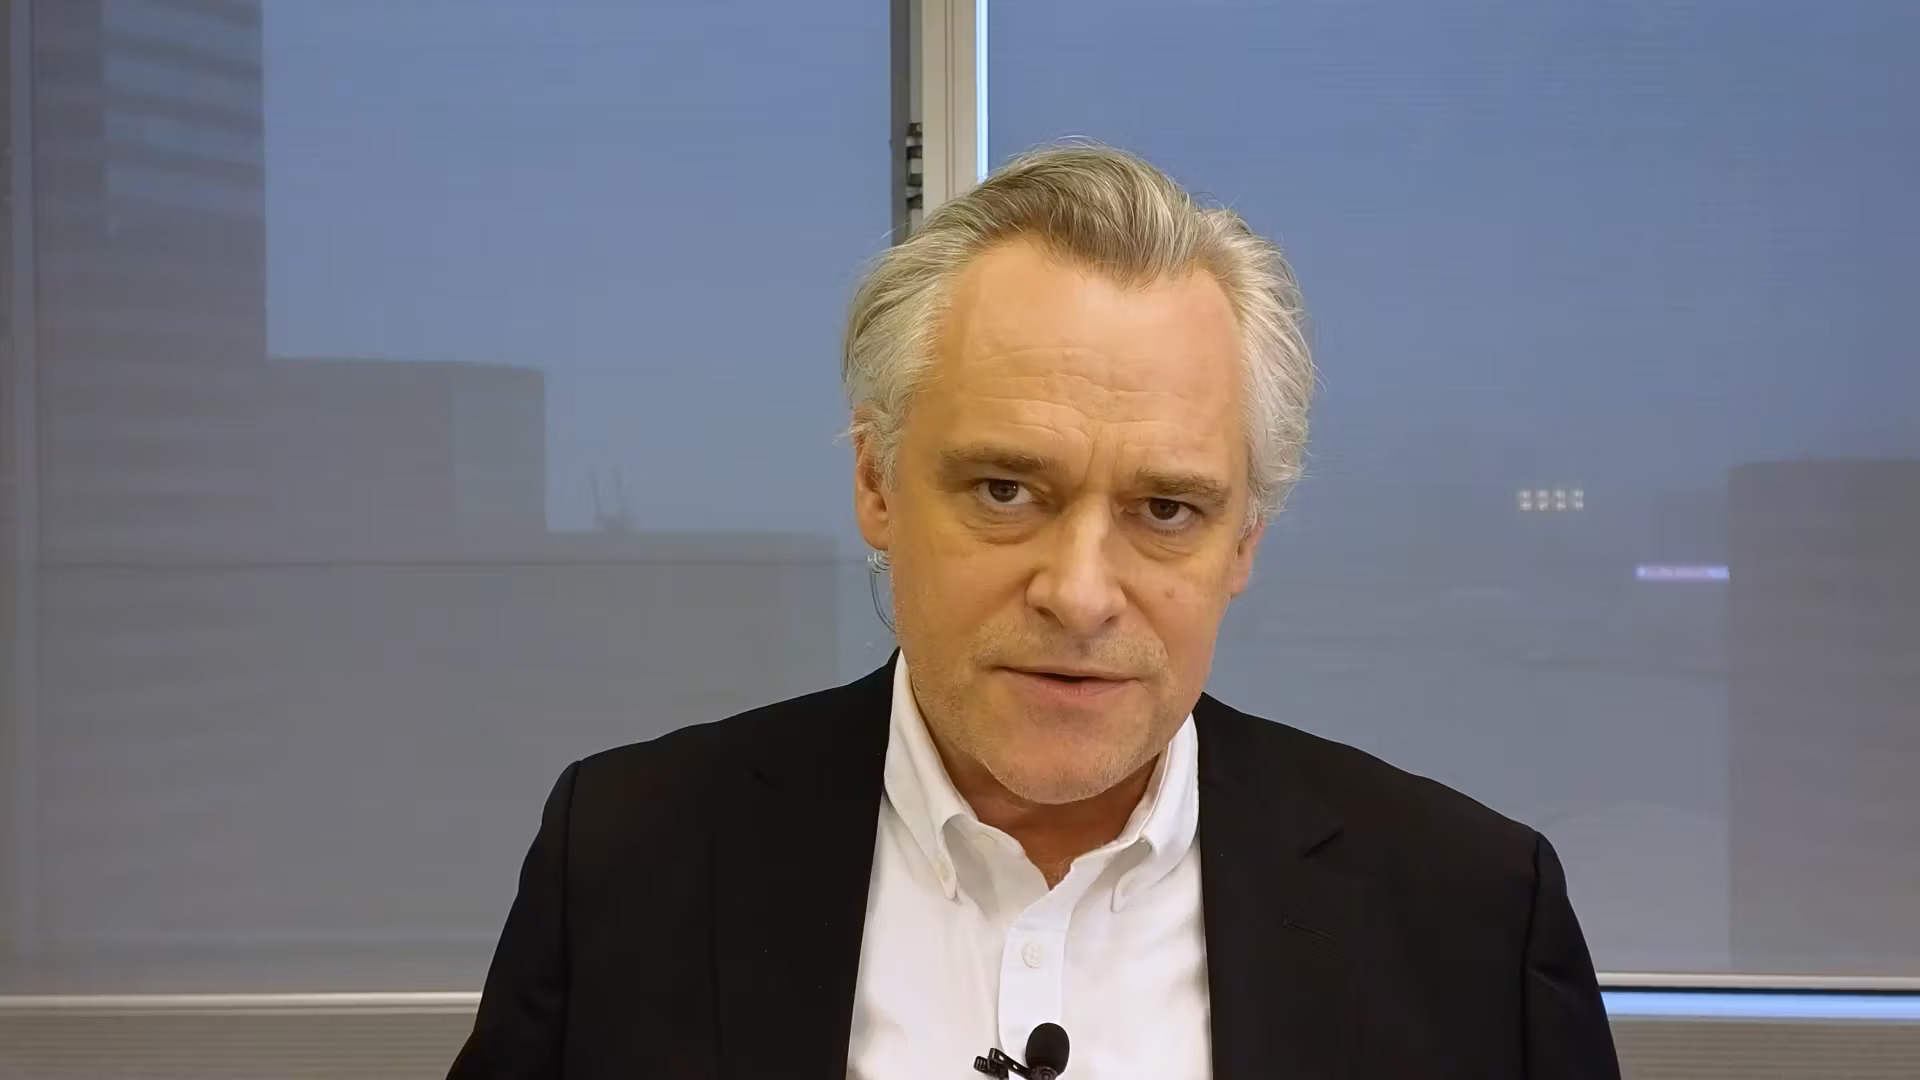 Video: The Outlook For Oil Prices